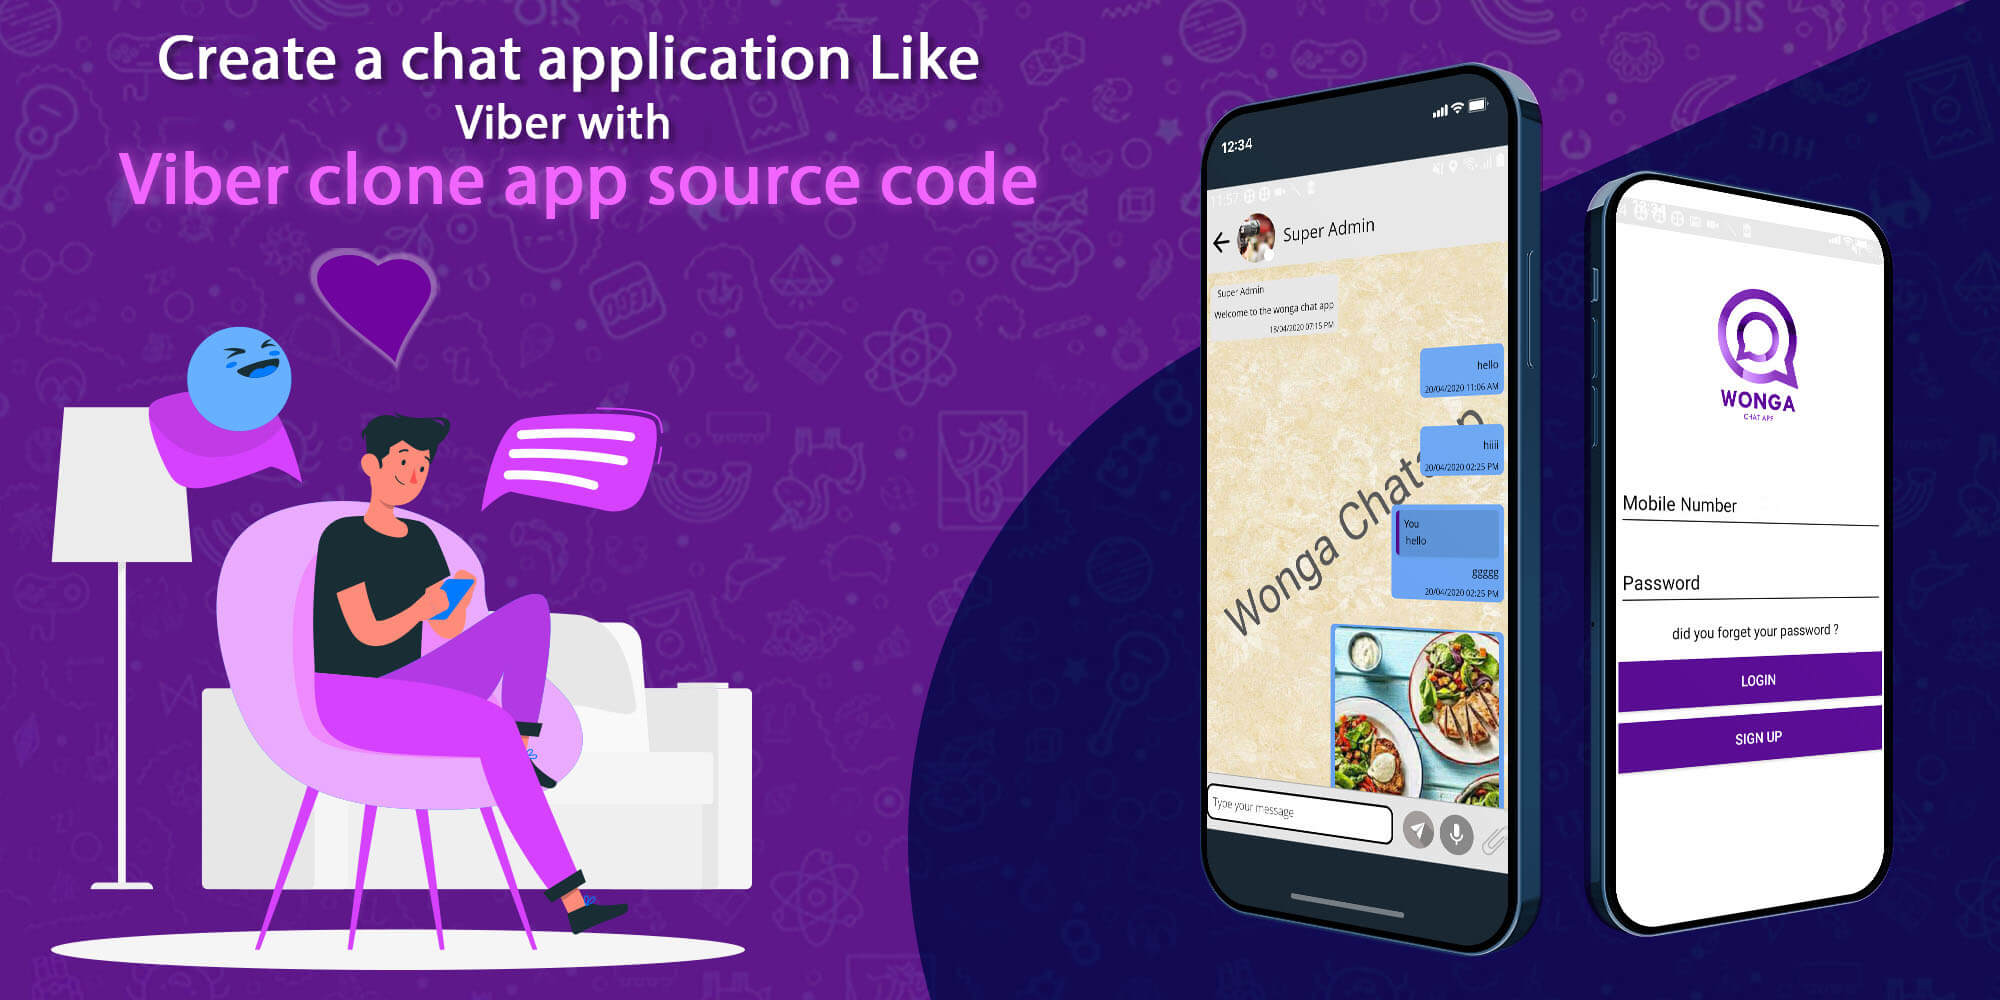 How to create a chat application like Viber with Viber clone app source code?